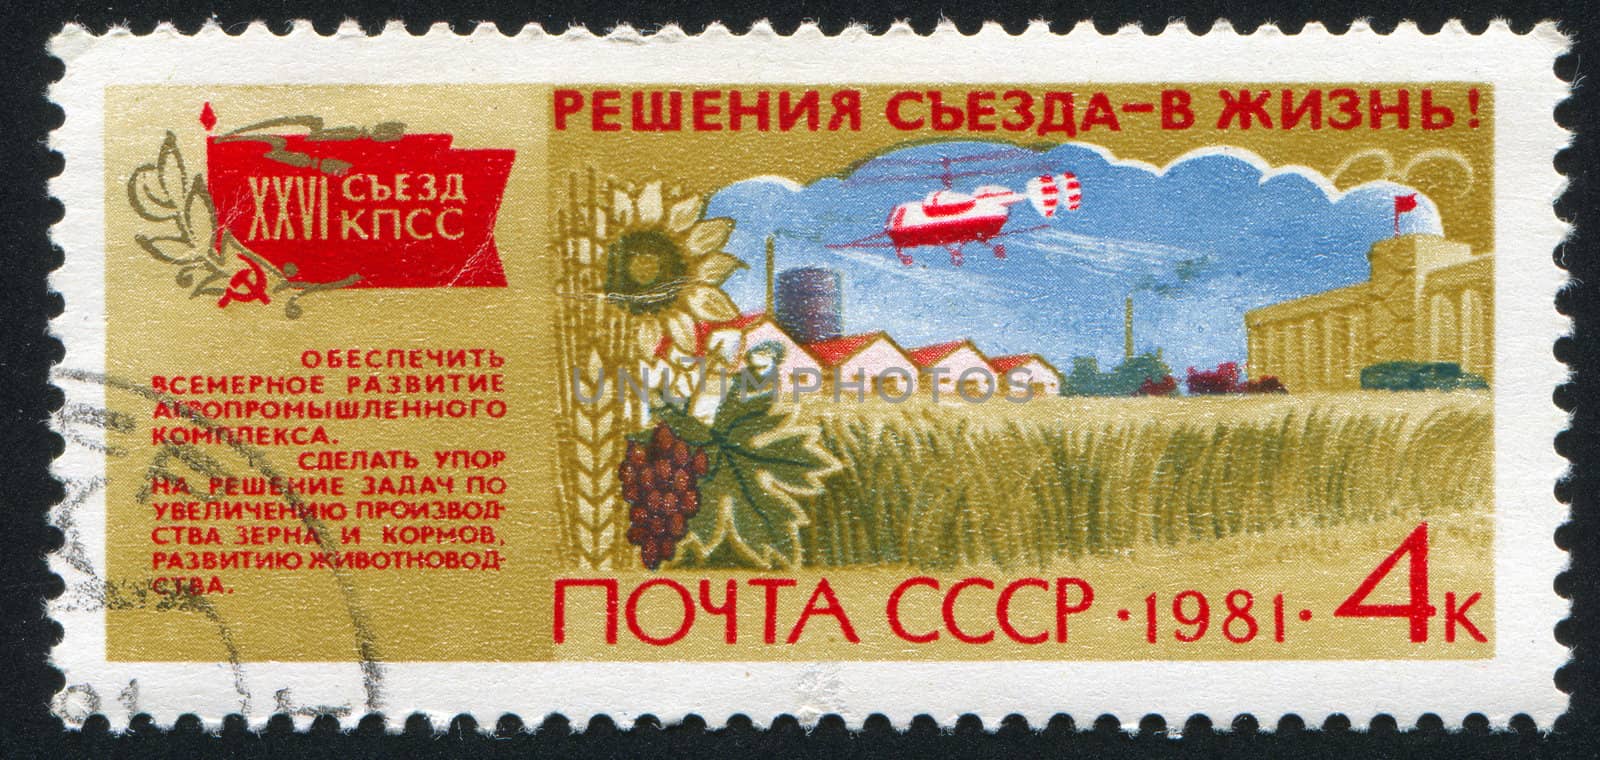 RUSSIA - CIRCA 1981: stamp printed by Russia, shows 26th Party Congress Resolutions, Agriculture, circa 1981